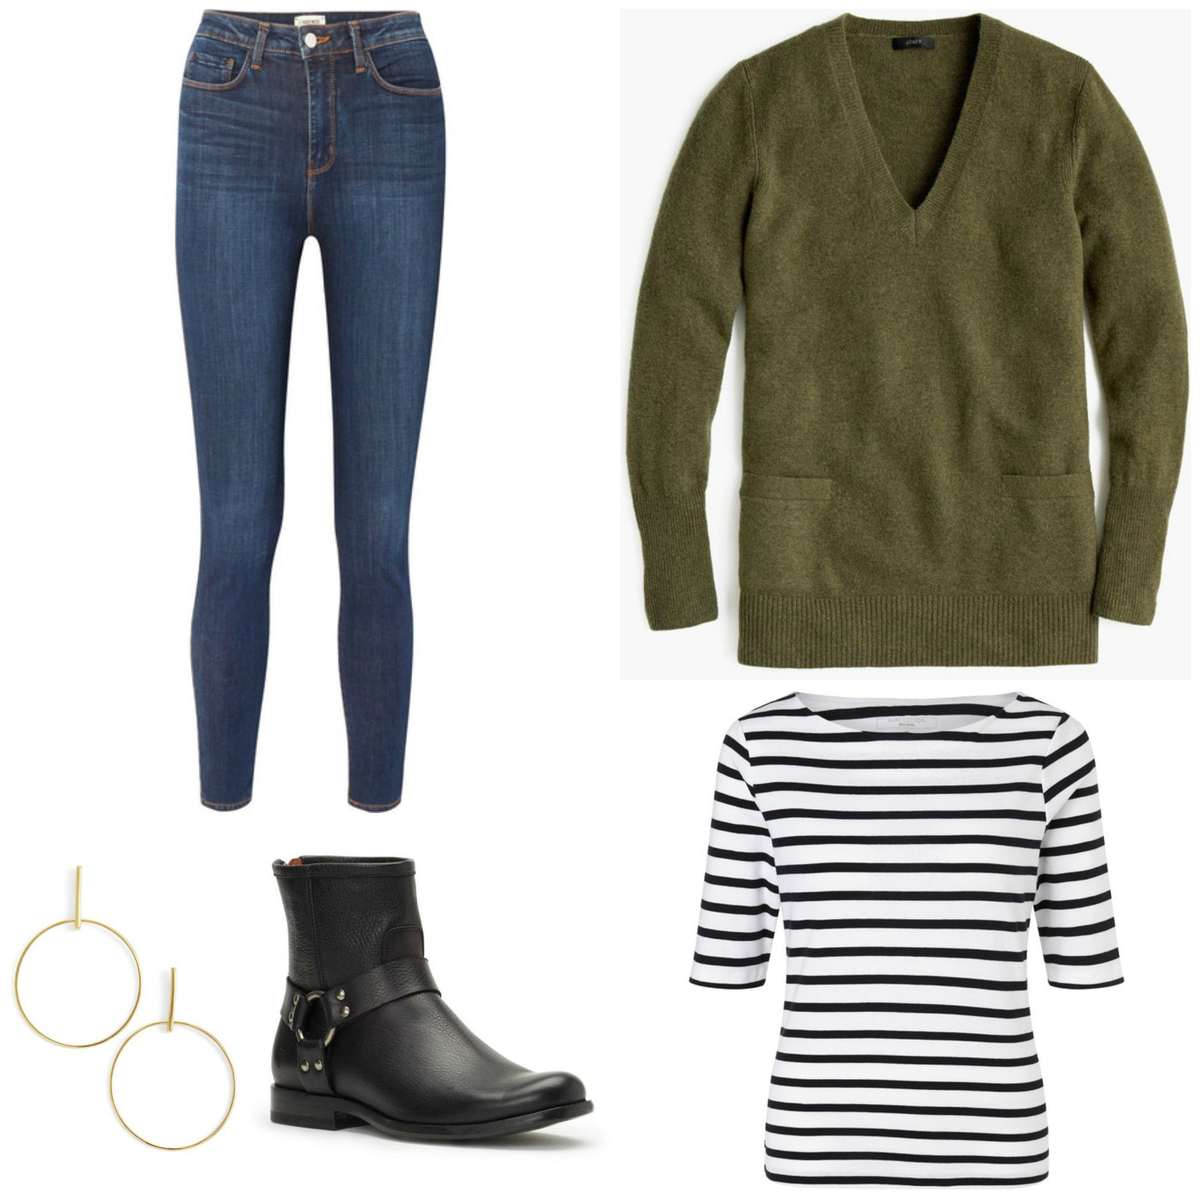 Styling pieces from a work from home capsule wardrobe featuring skinny stretch jeans, Breton tee, tunic sweater, harness boots, and Argento Vivo gold statement earrings.